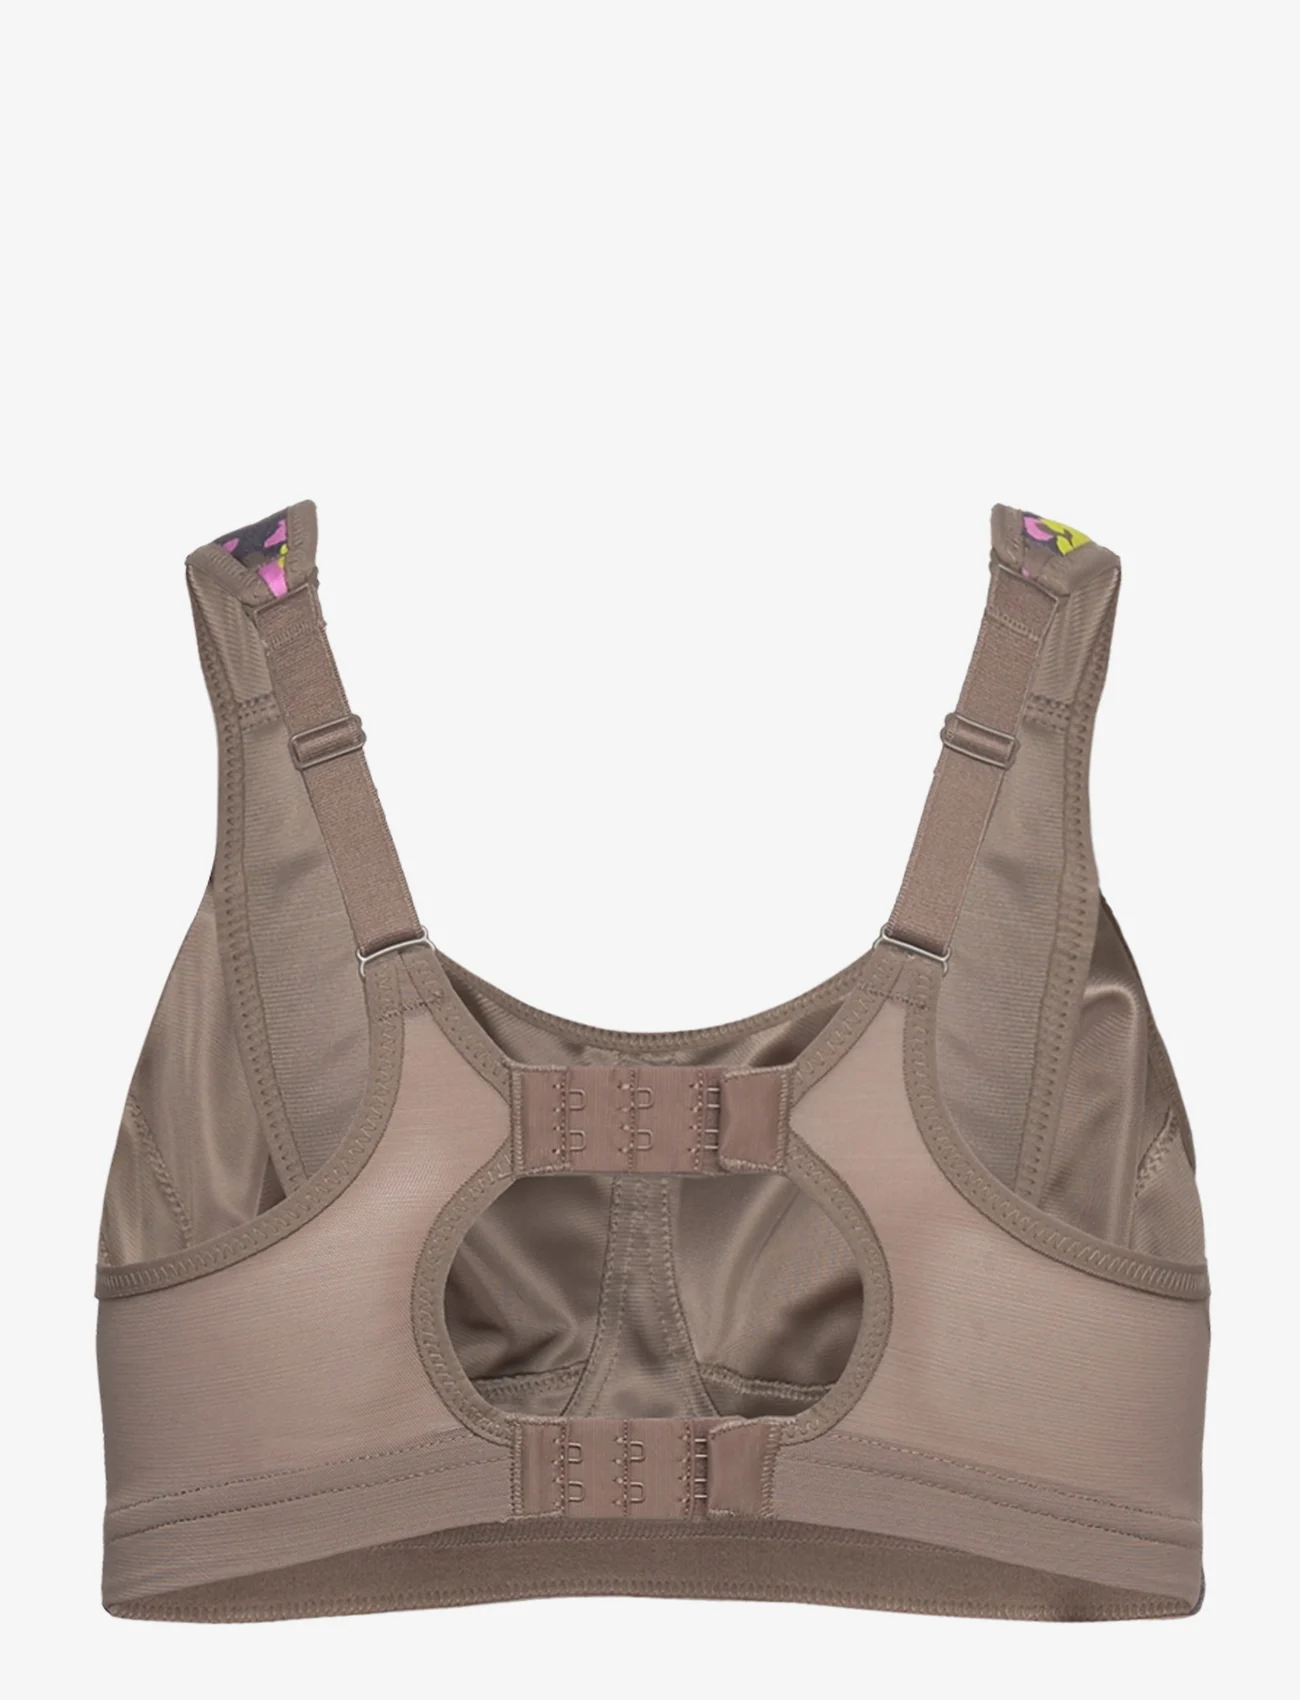 Shock Absorber - Active Multi Sport Bra S4490 - grey MS051 - 70E - high support - grey - 1